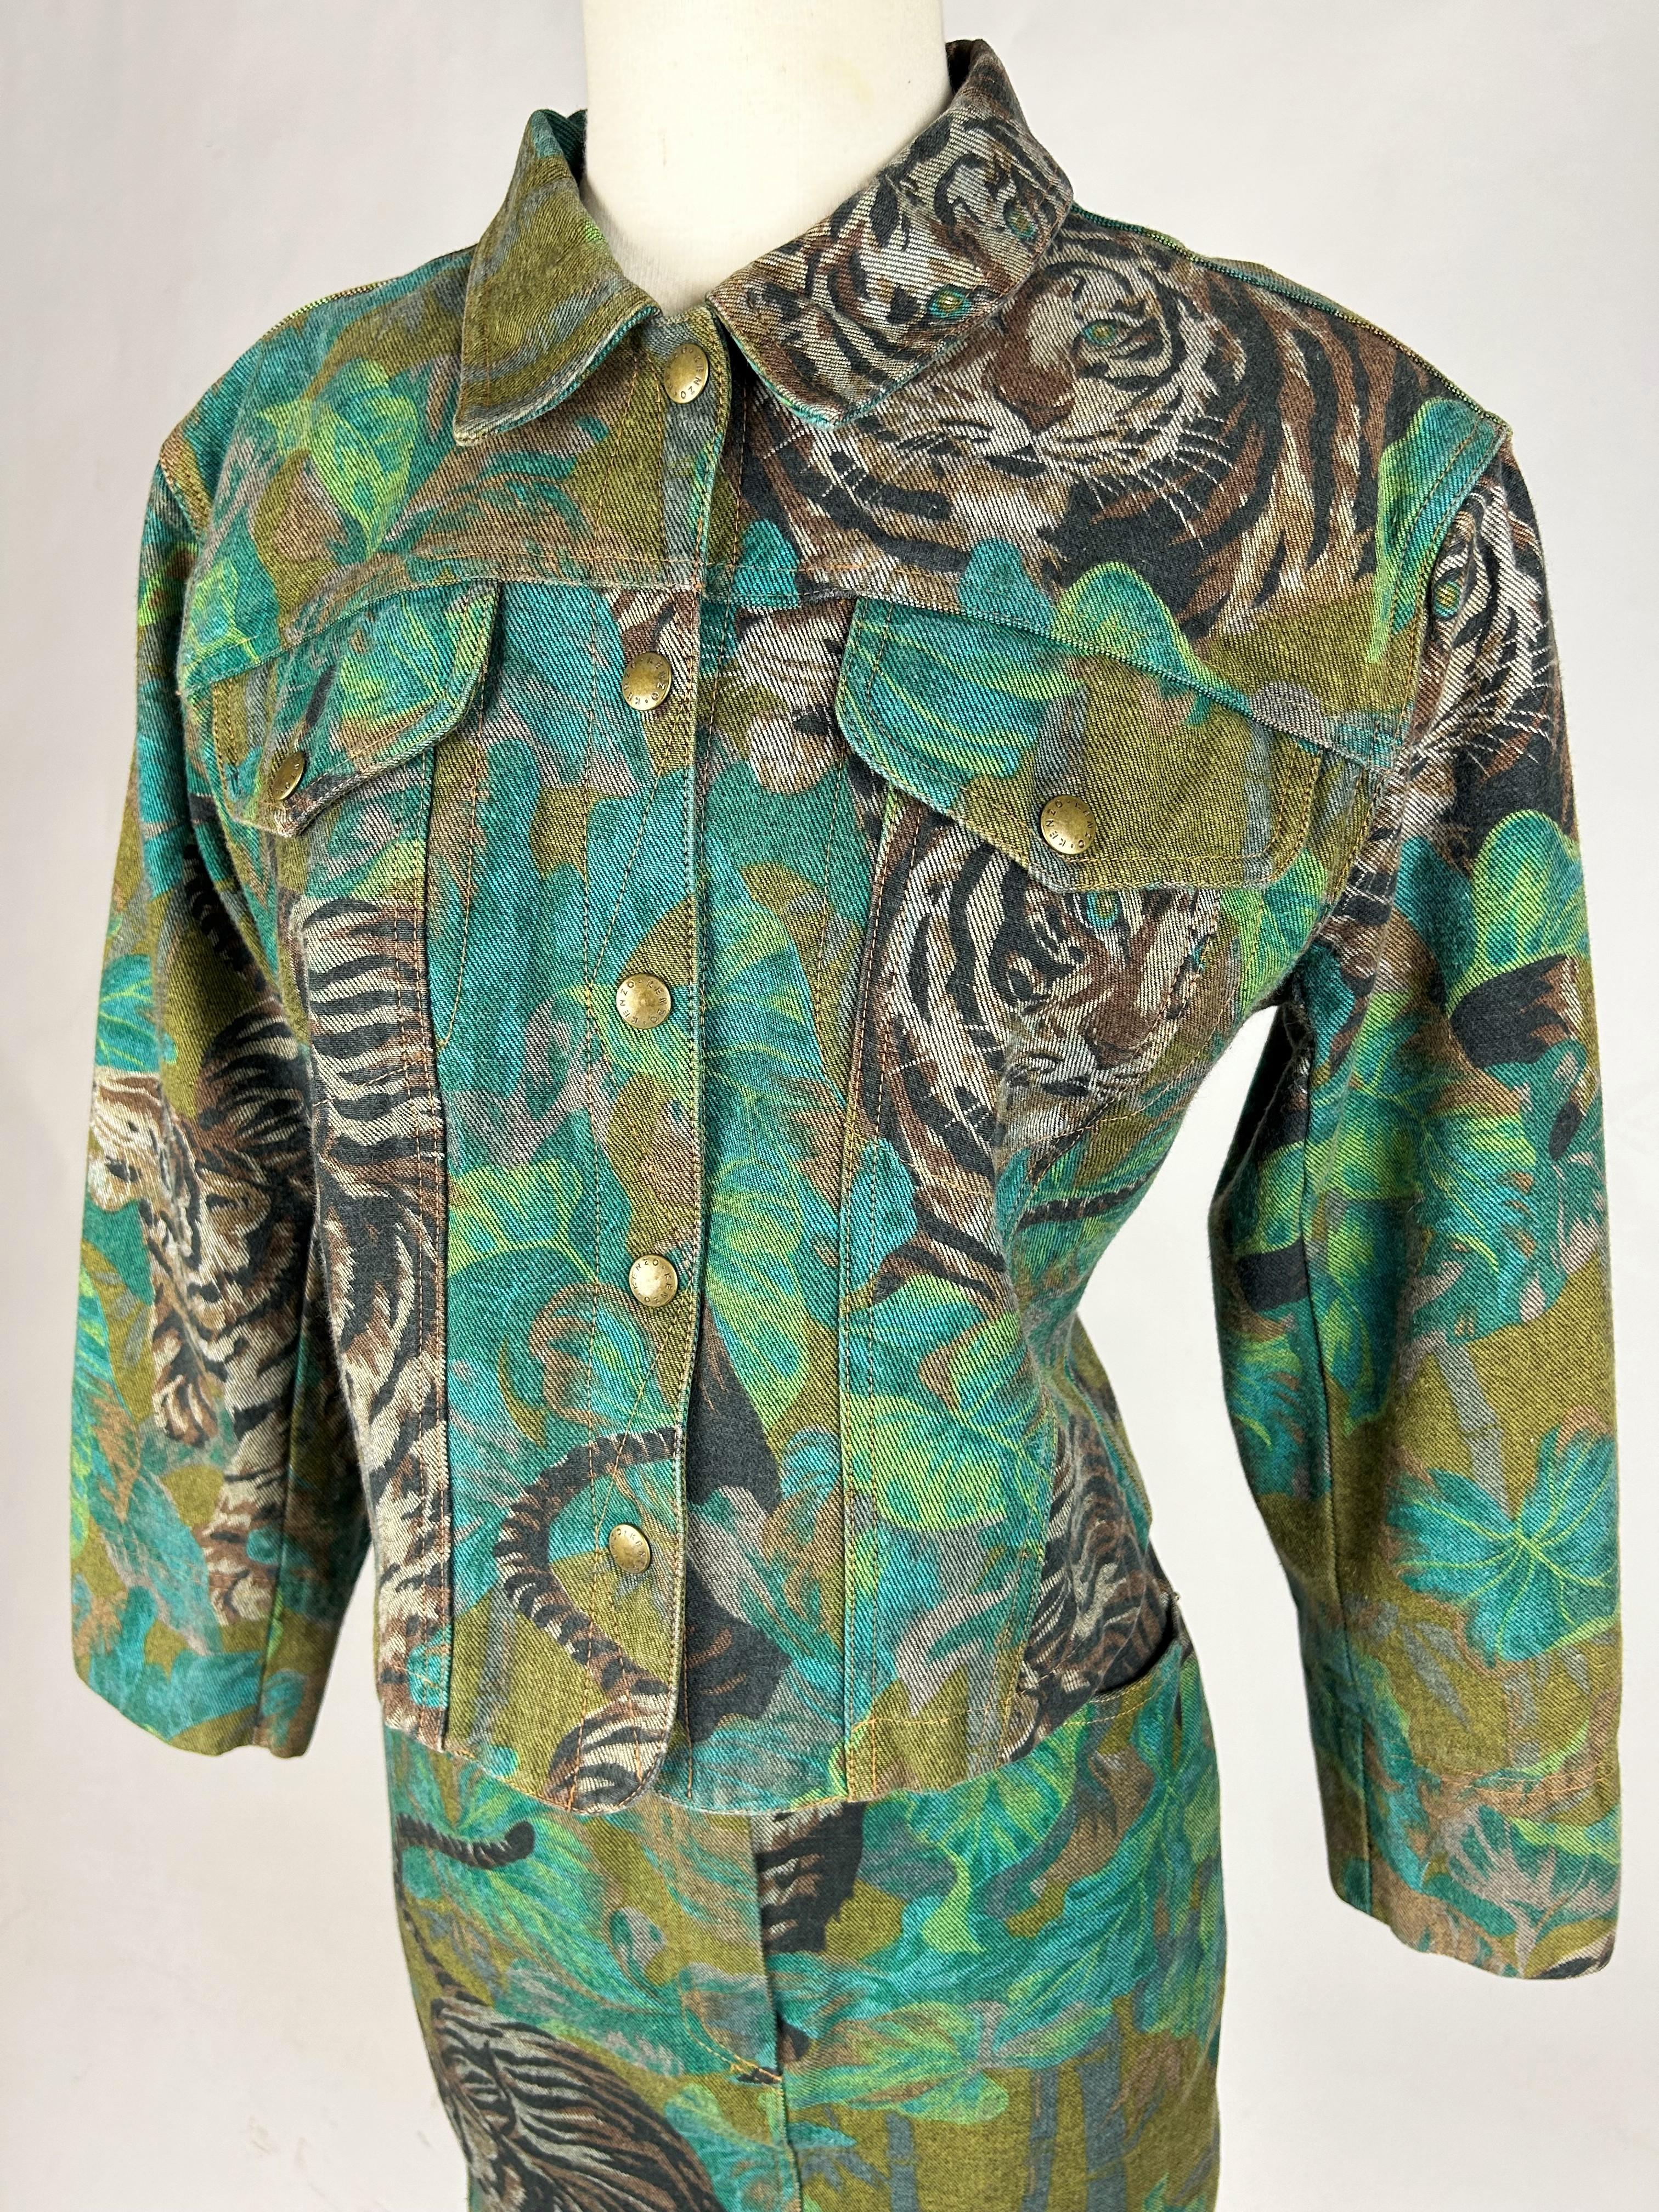 Jacket and Skirt by Kenzo Takada, Jungle & Tiger Print on Denim - French C. 1990 For Sale 7